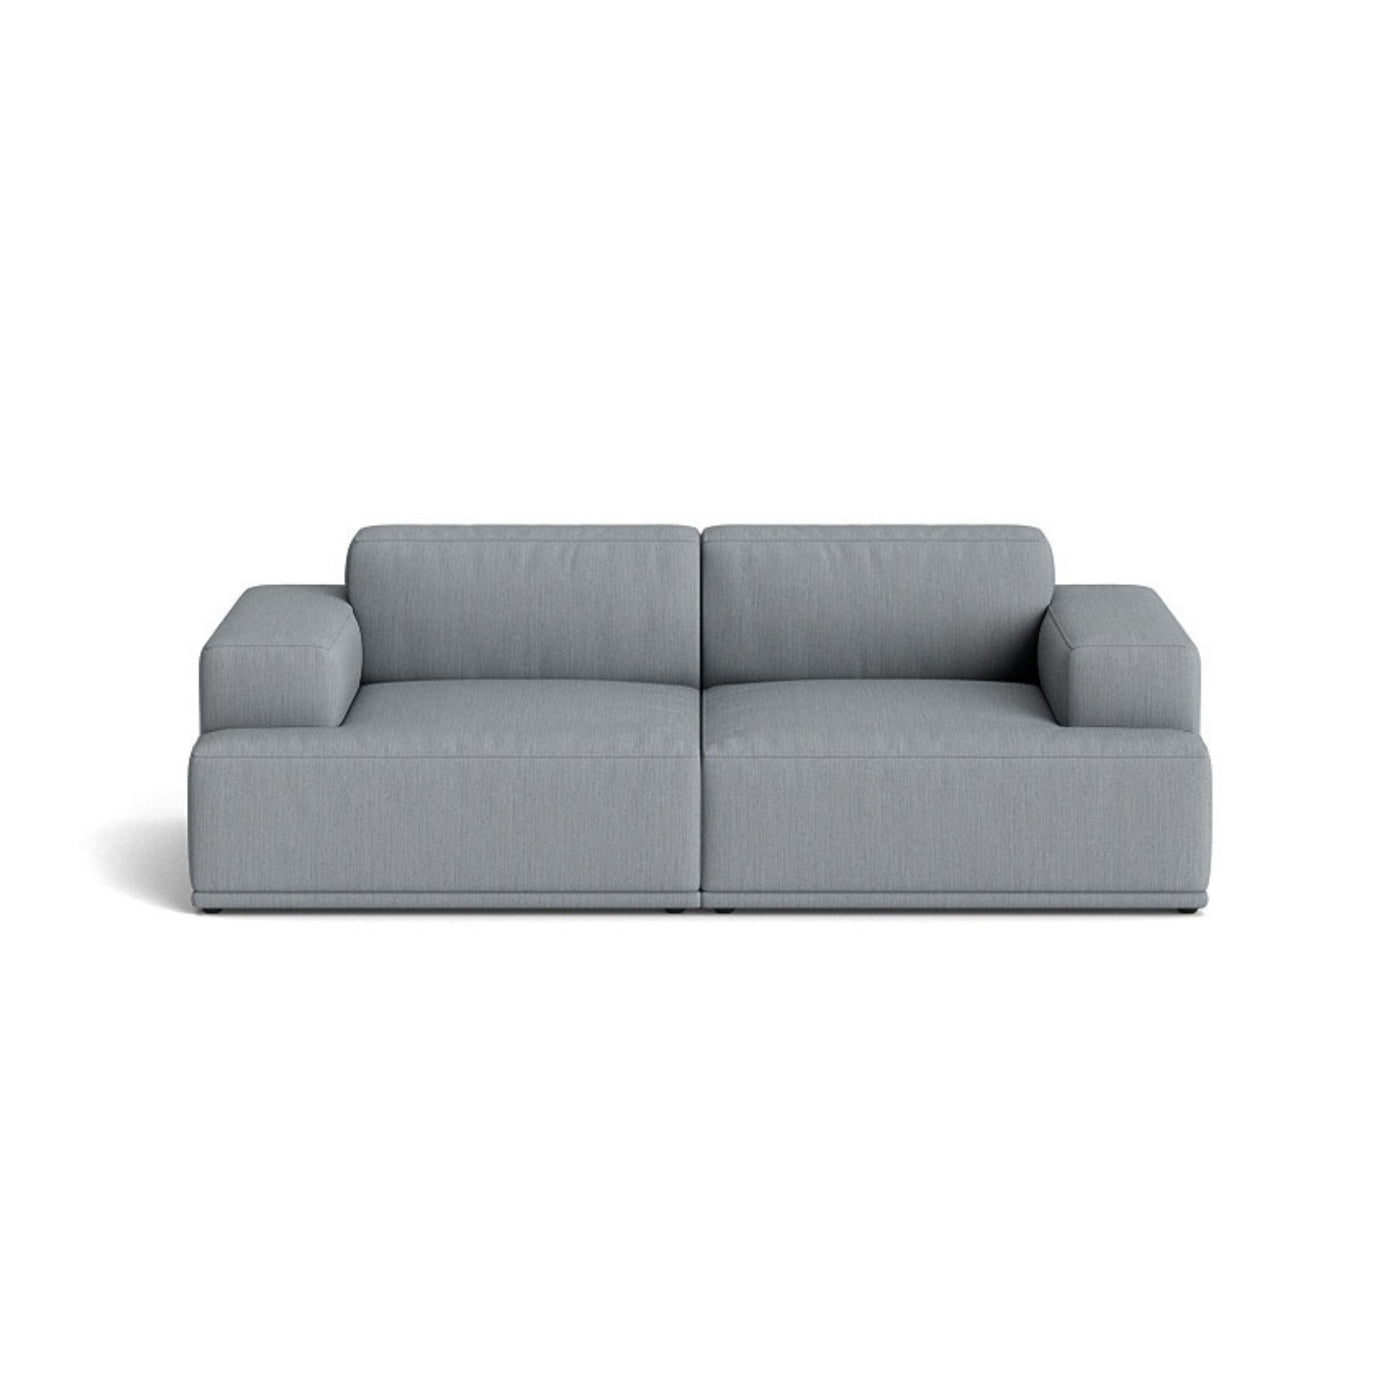 Muuto Connect Soft Modular 2 Seater Sofa, configuration 1. made-to-order from someday designs. #colour_balder-1775